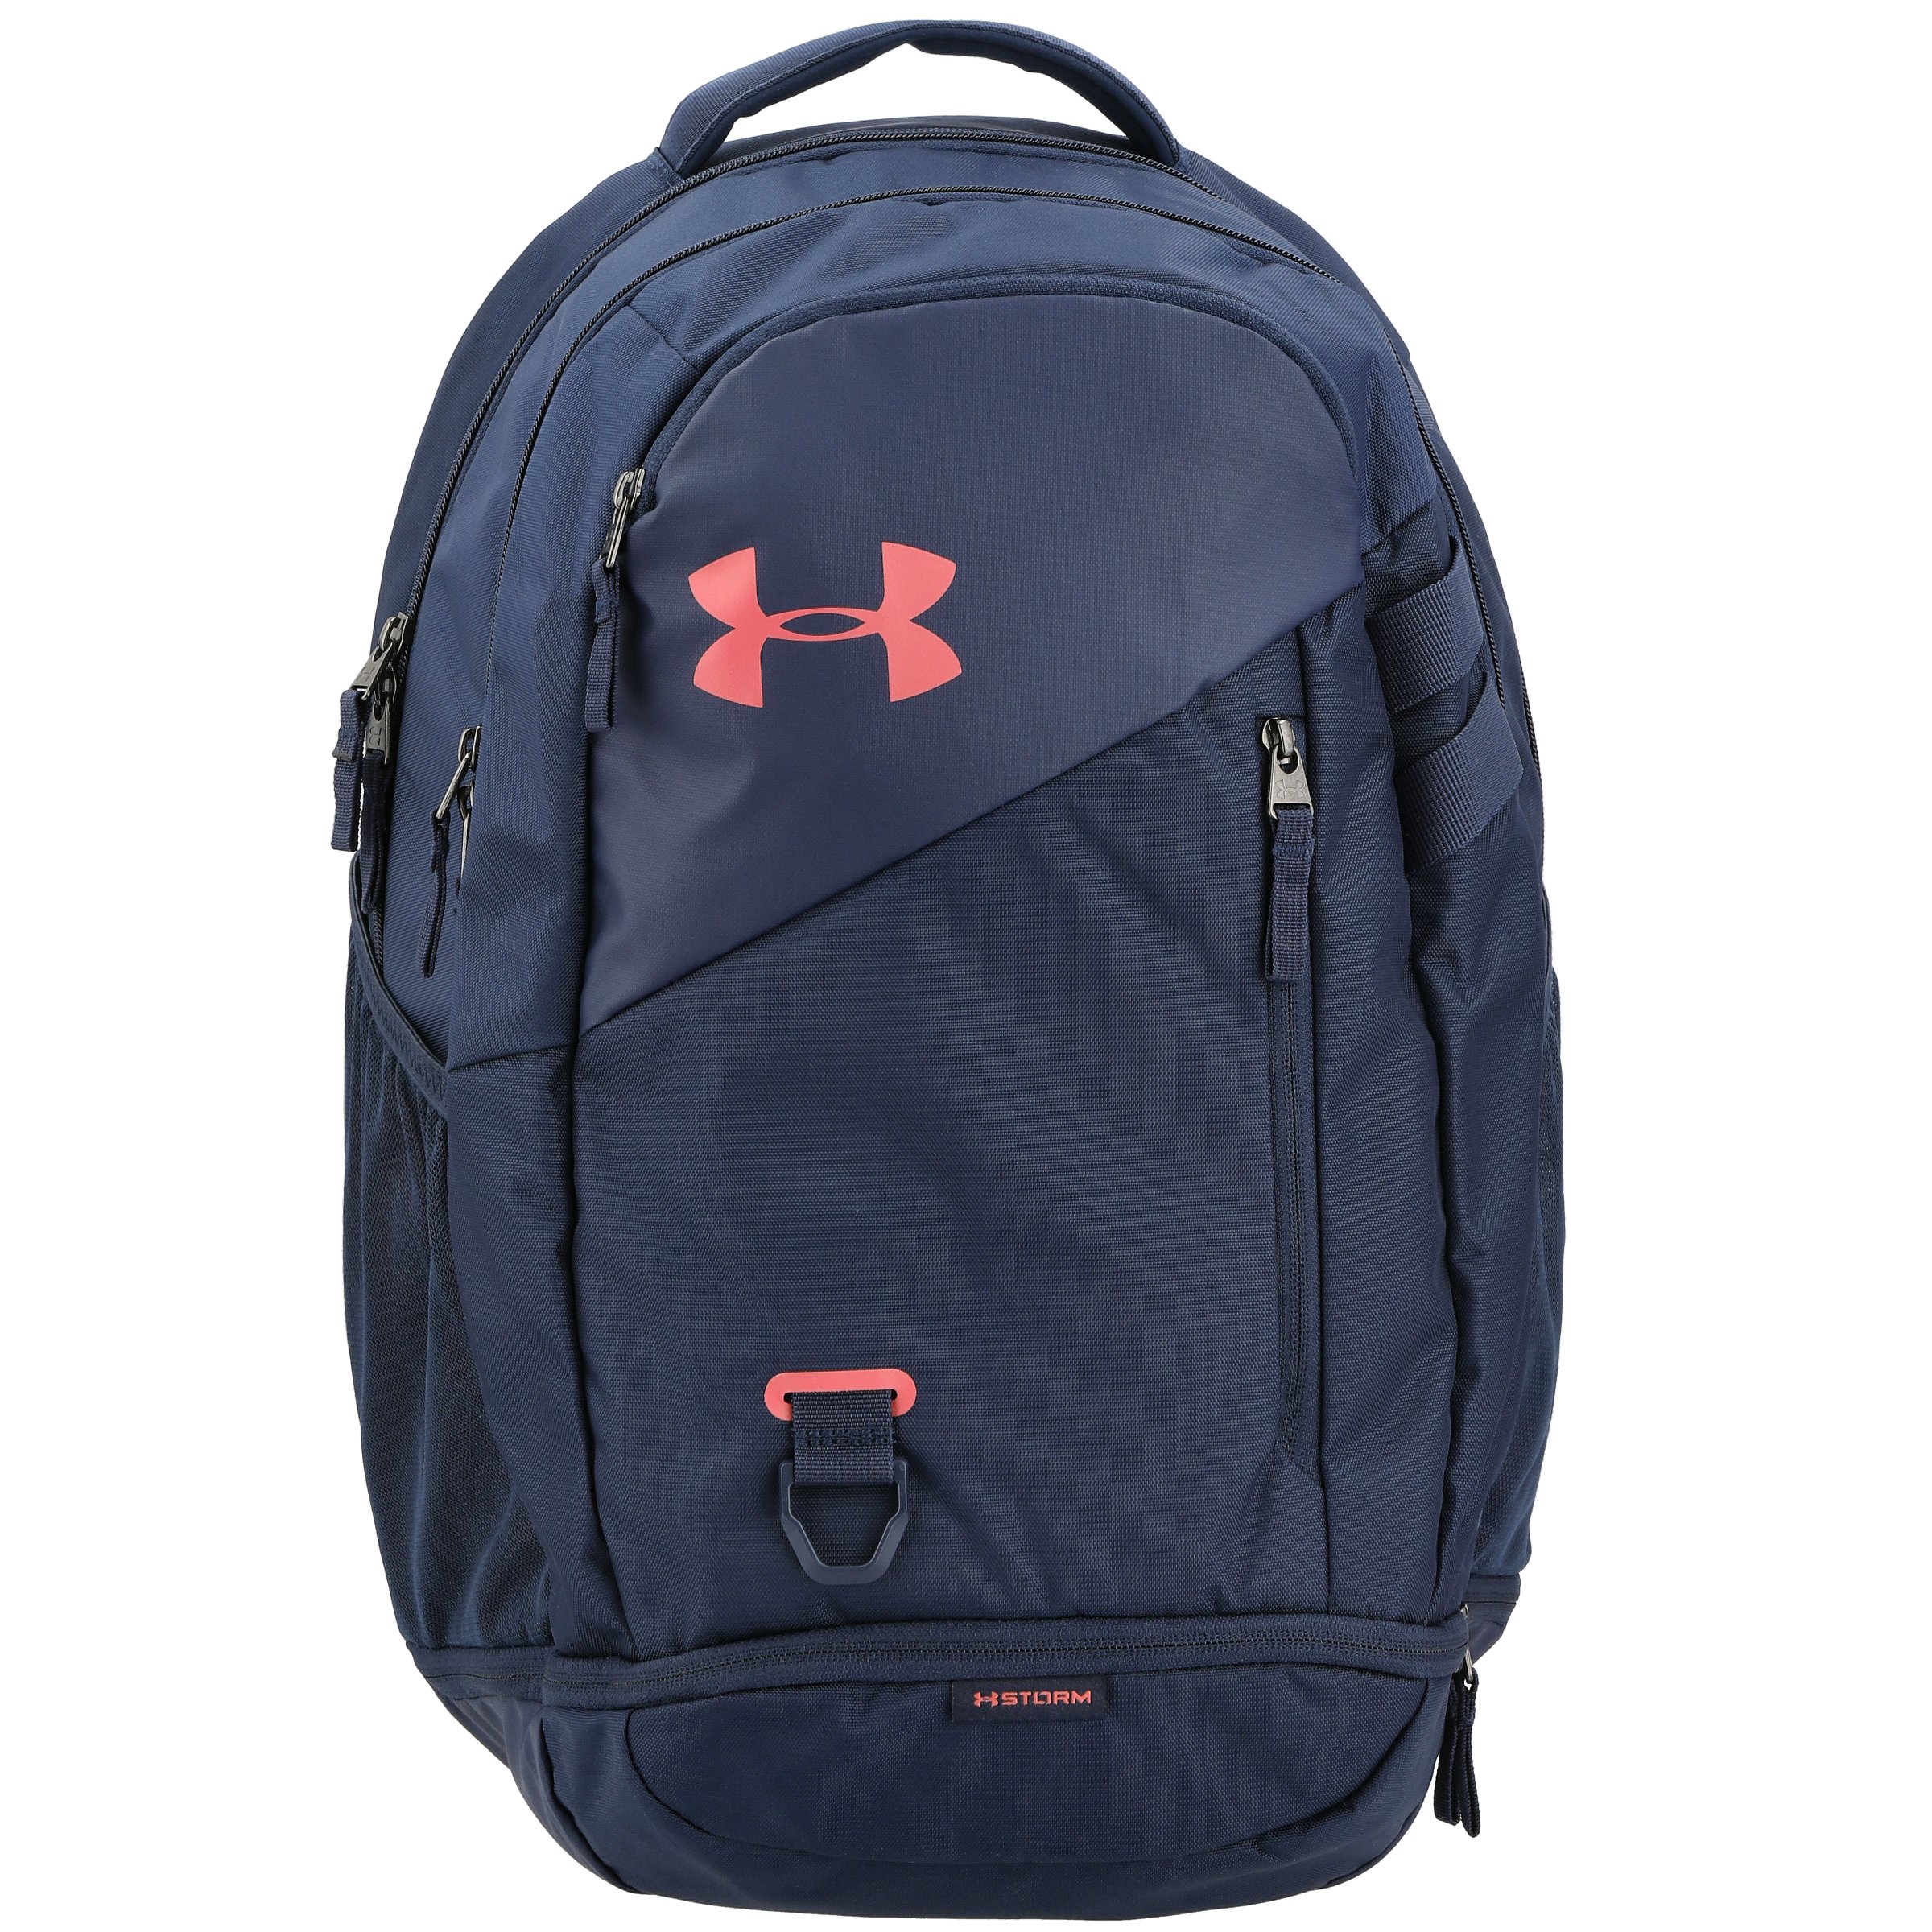 U.S. Navy Anchor Under Armour Hustle 5.0 Backpack (Navy)